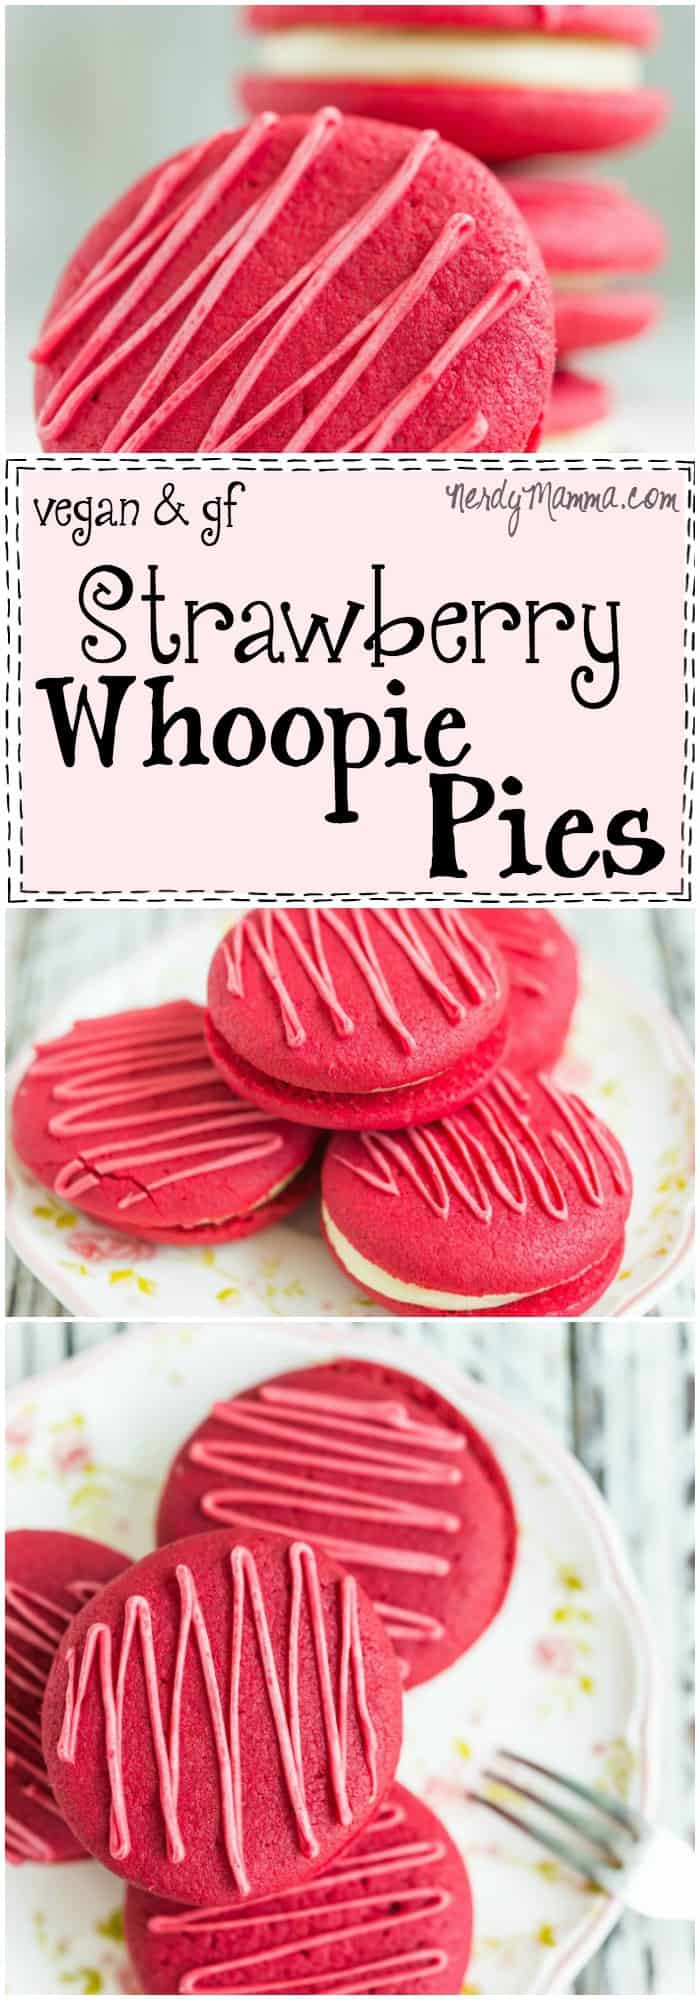 This recipe for gluten-free whoopie pies is so simple! And the strawberry Awesome. I love it--and can't wait to do this for the kids!